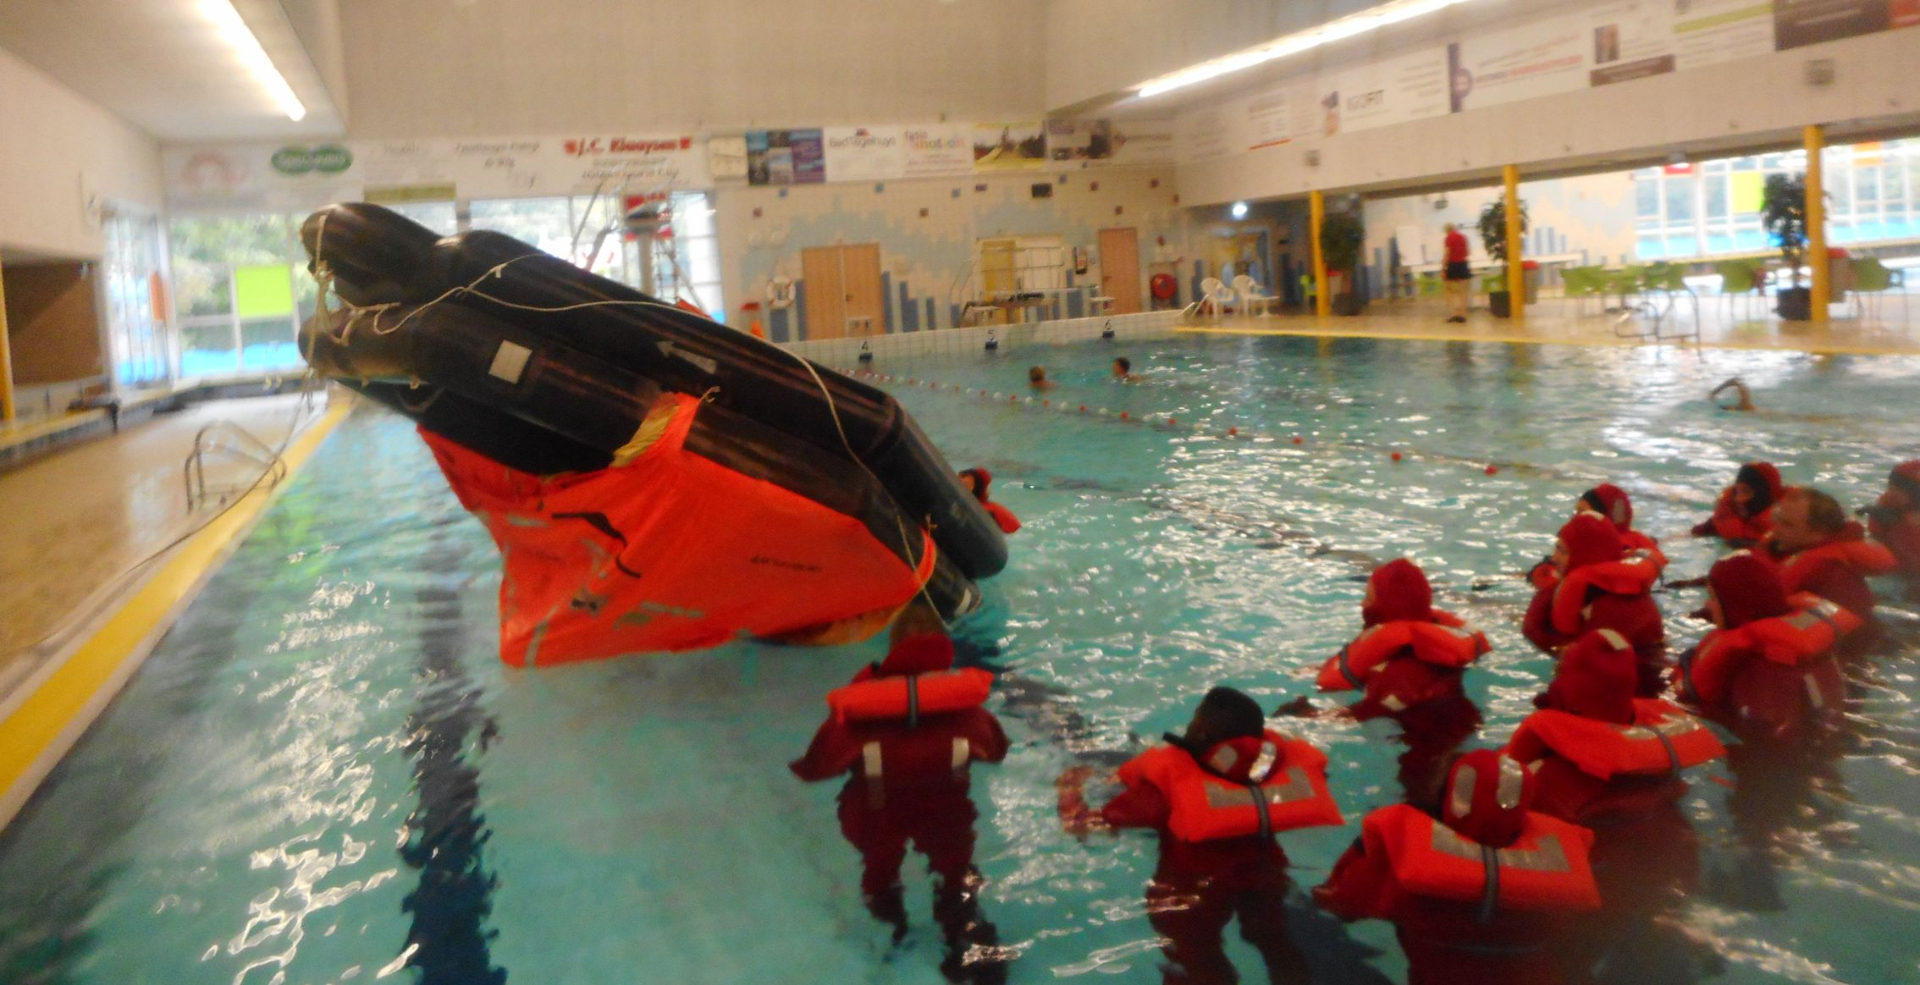 We get instructions on how to flip a life raft in the water